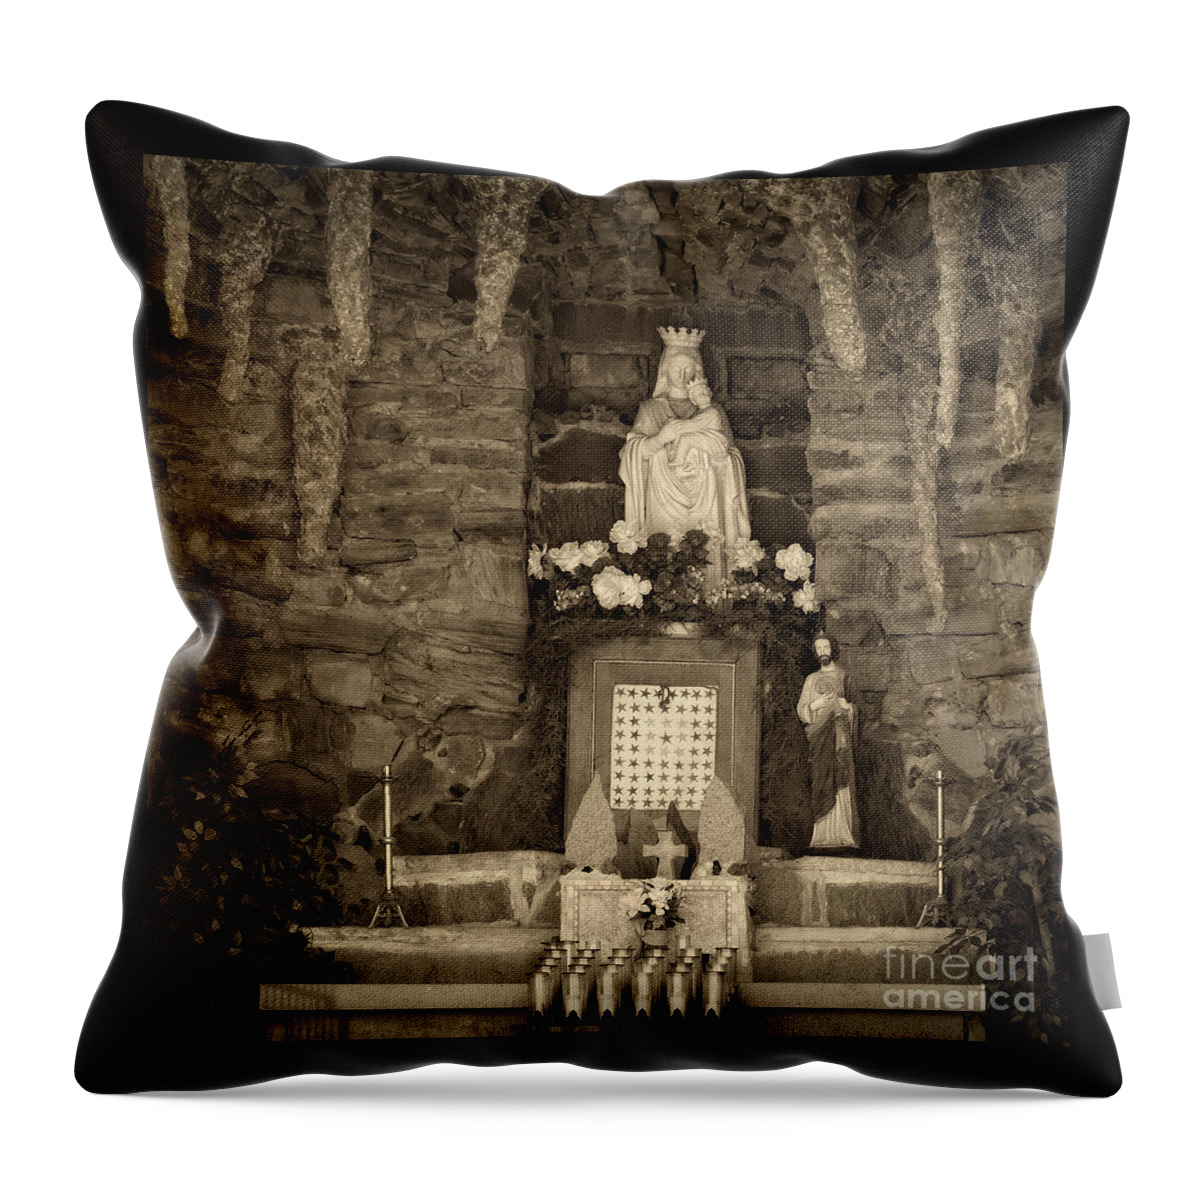 St. Mary's Grotto Throw Pillow featuring the photograph St. Mary's Grotto by Imagery by Charly